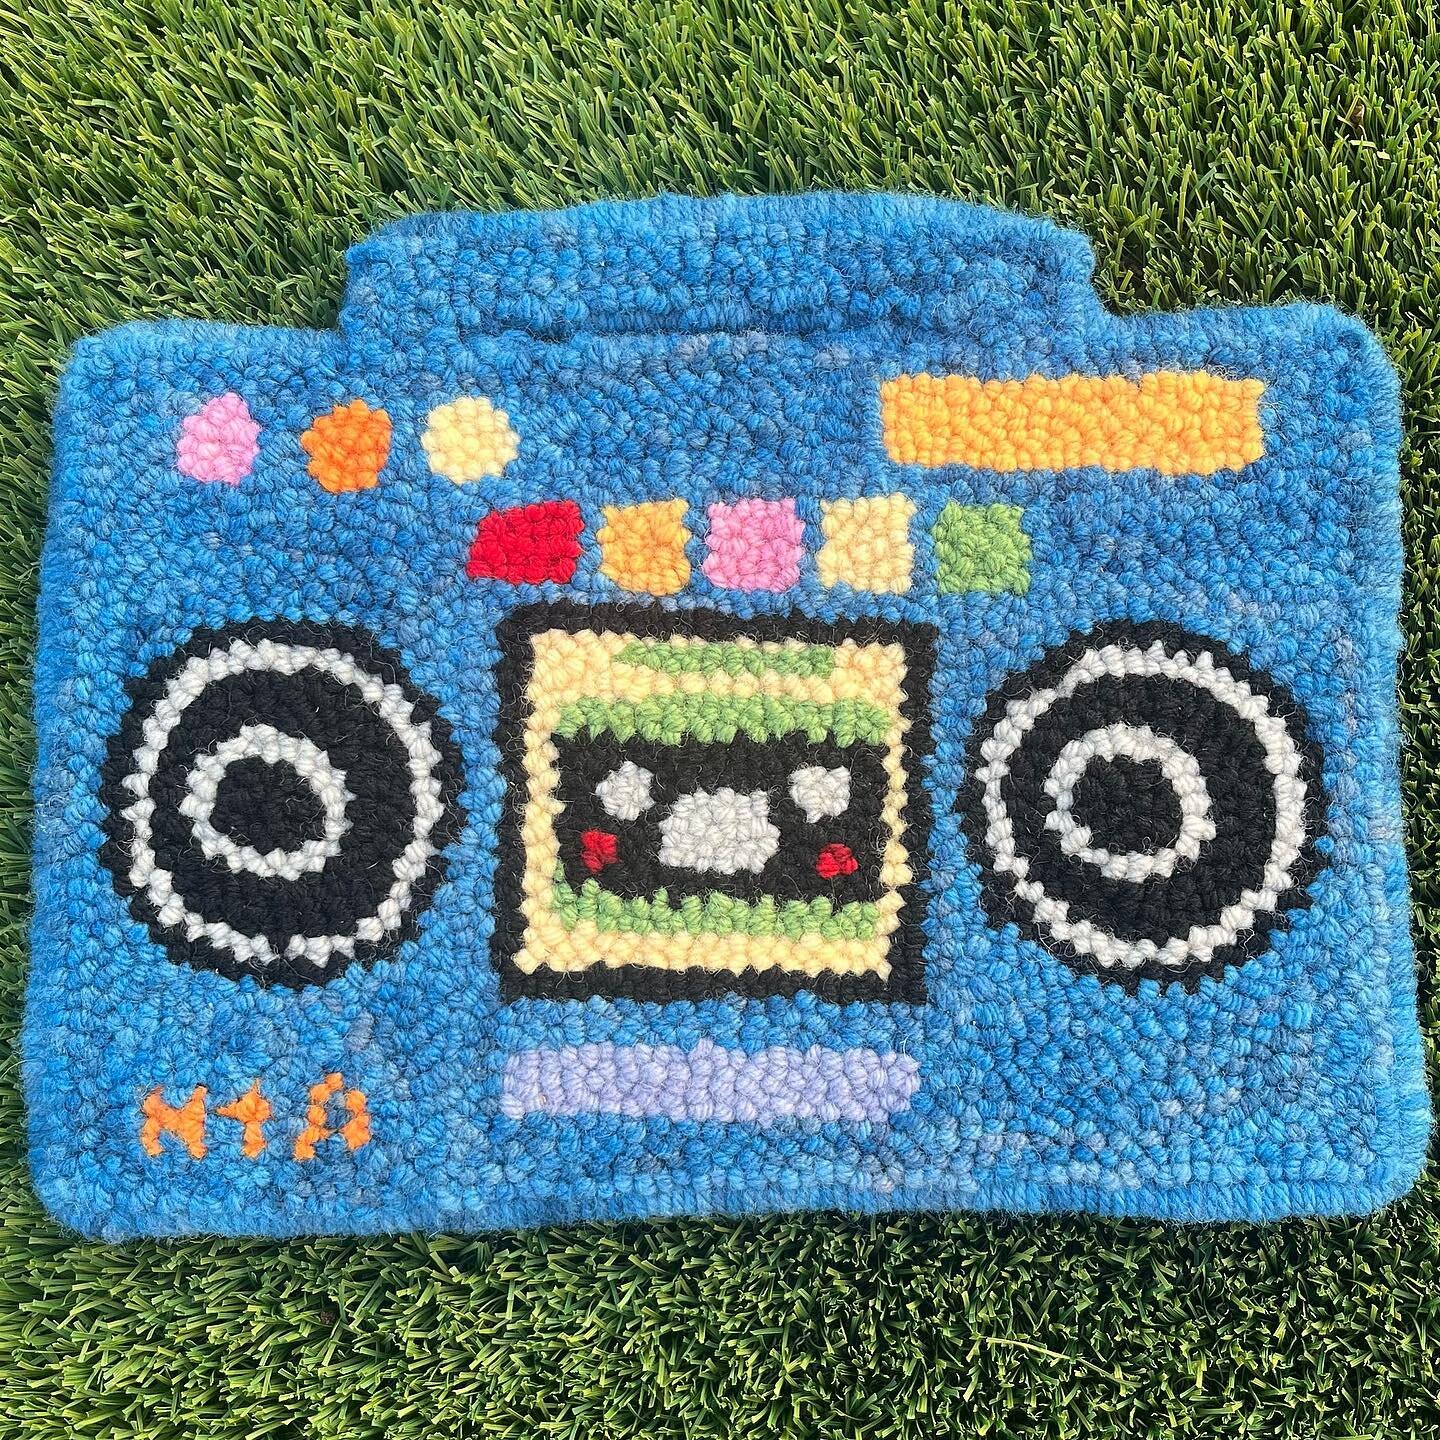 A funky lil stereo for my partner, per his request. Front and back ❤️🎶

#punchneedle #punchneedleart #punchneedlerughooking #storytellerwool #oxfordpunchneedle